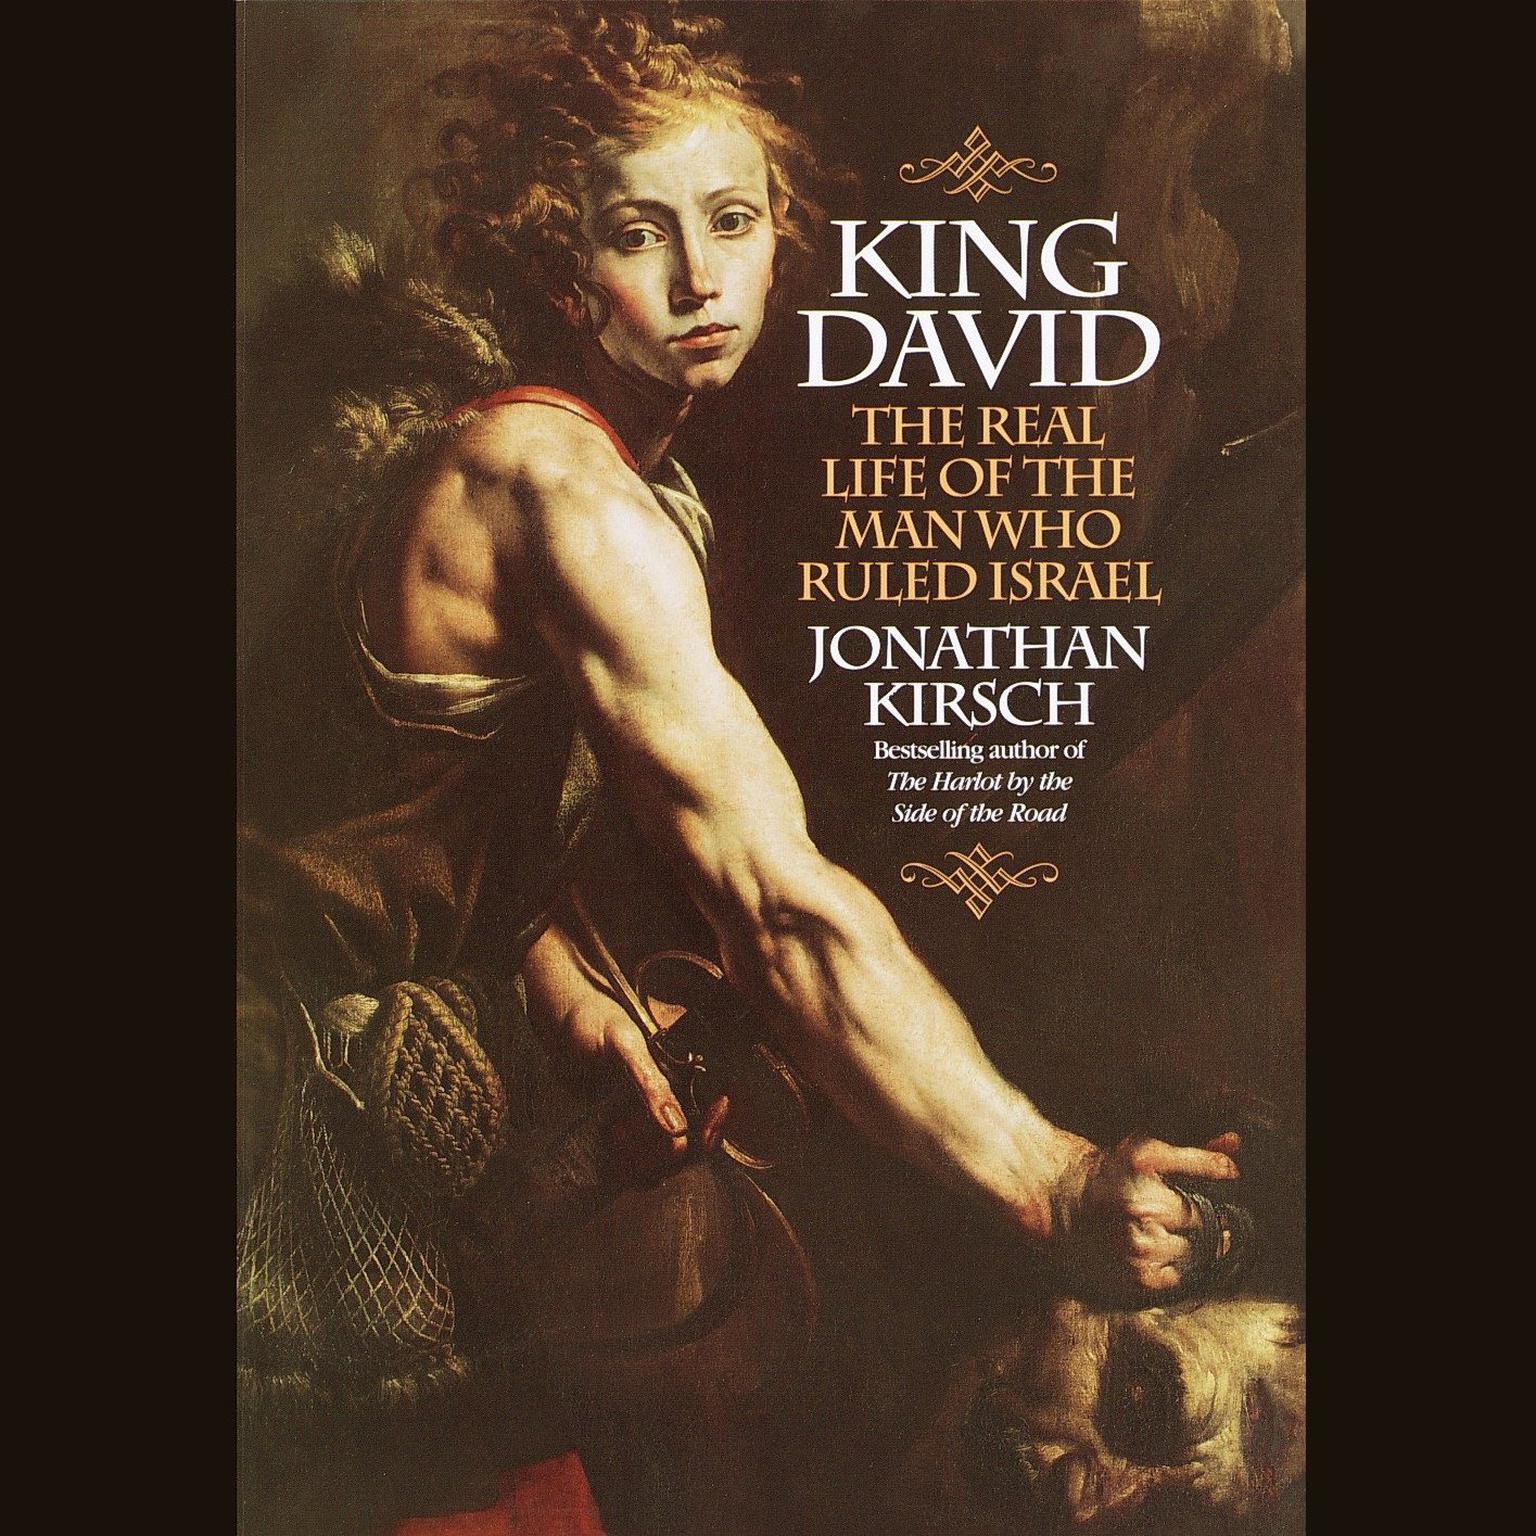 King David: The Real Life of the Man Who Ruled Israel Audiobook, by Jonathan Kirsch